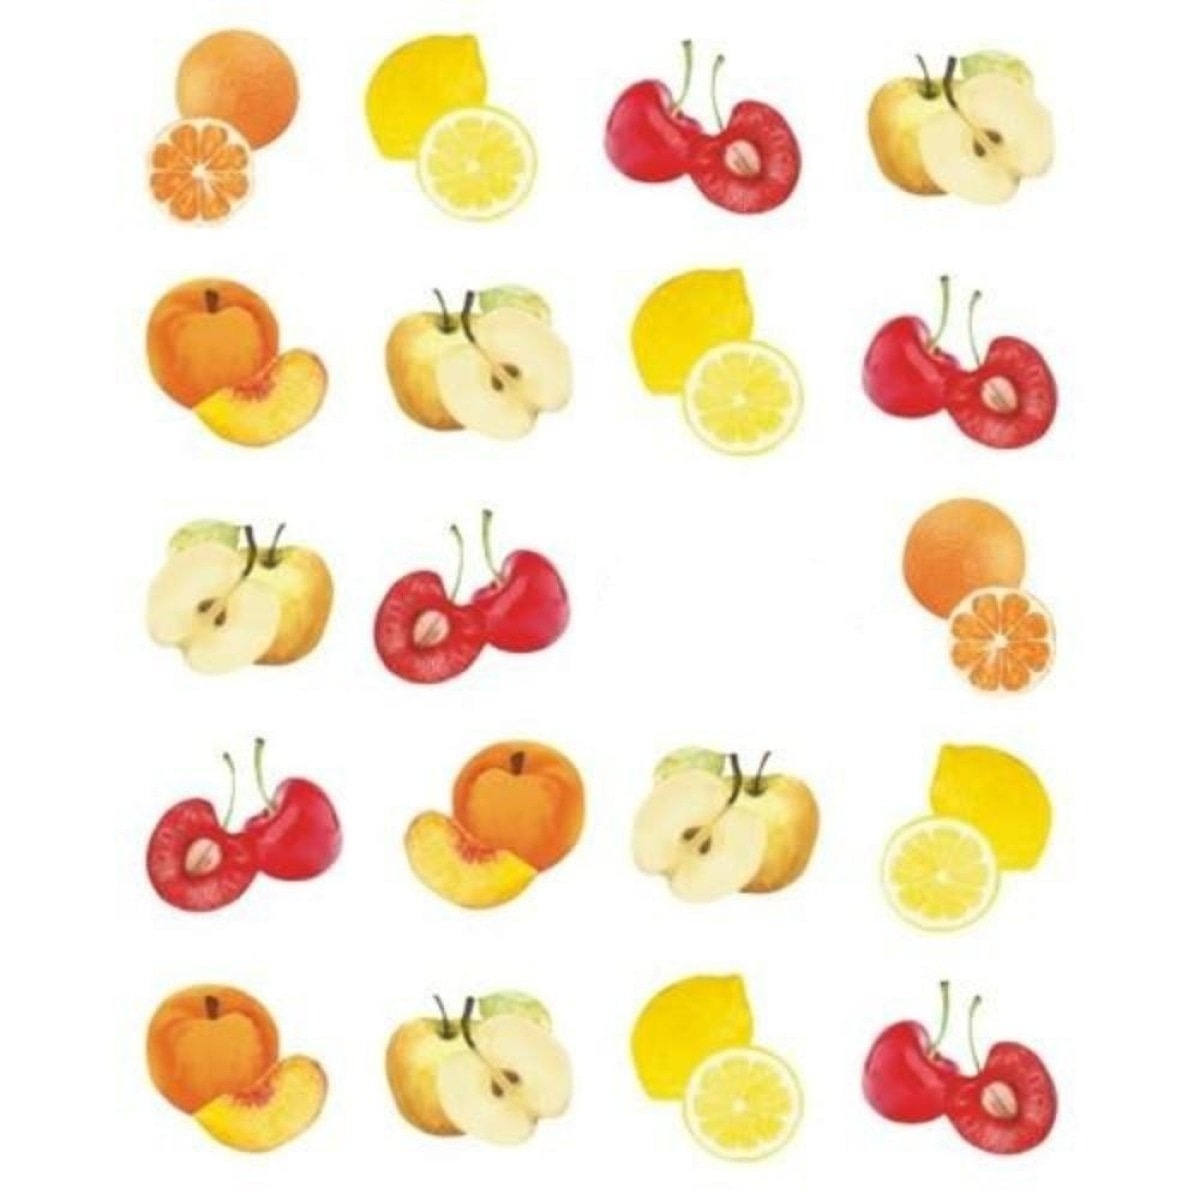 Strawberry Summer Cake & Fruit Stickers For Nails Nail Manicure Art Stz-490 - Sheet